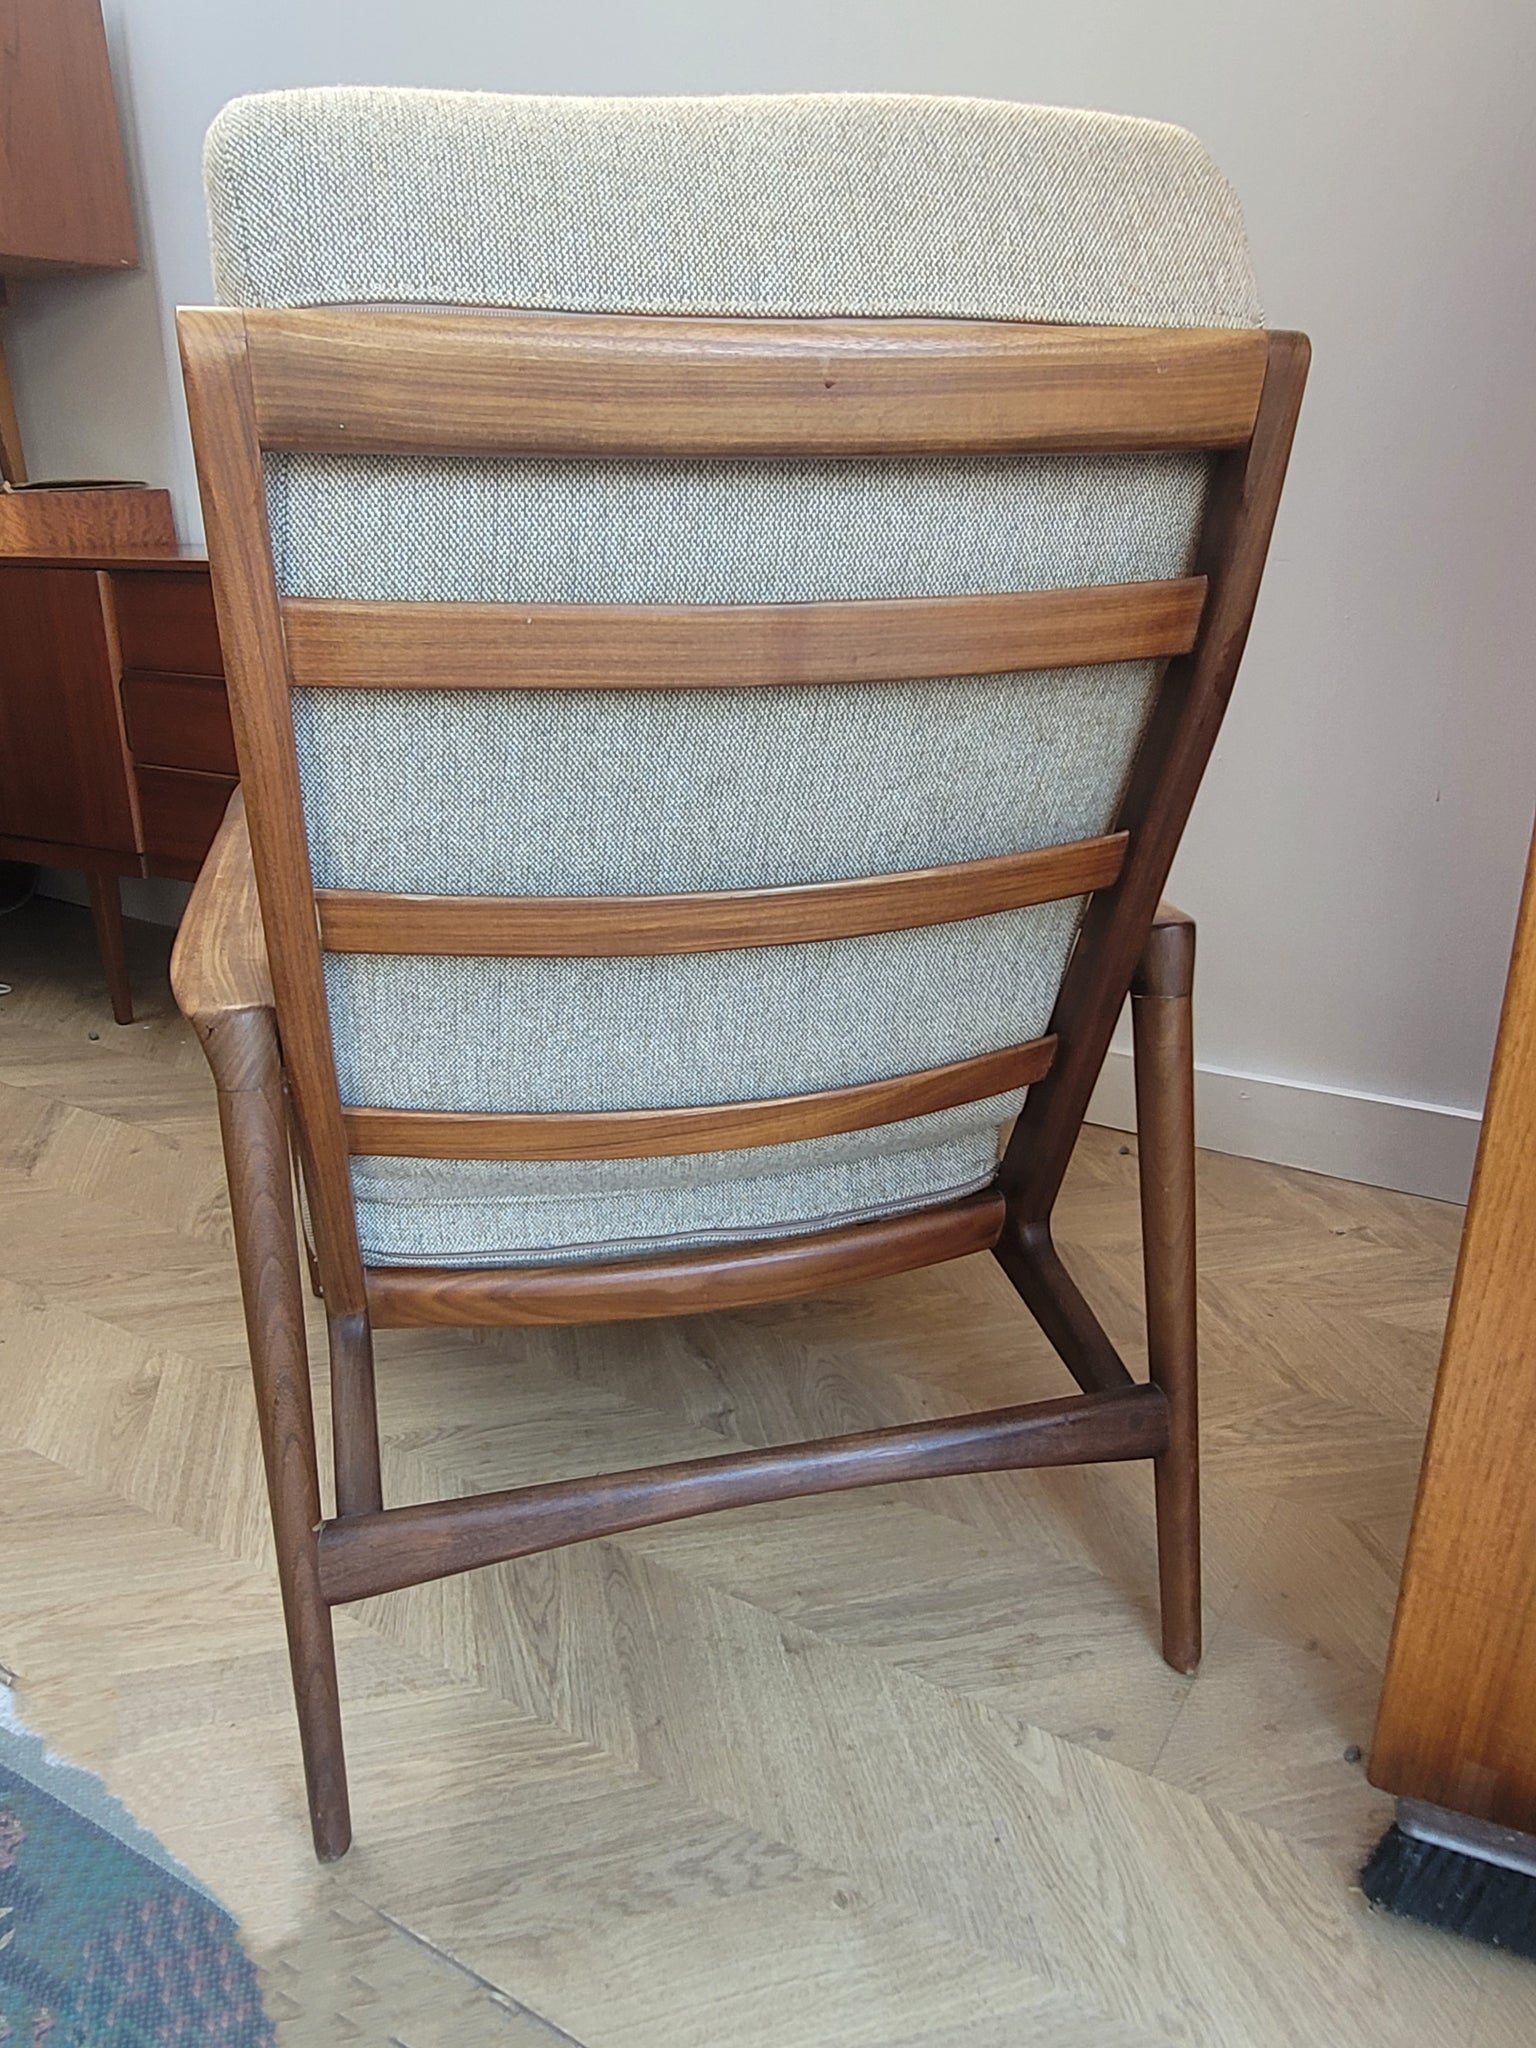 Guy Rogers 'New Yorker' High Back Chair